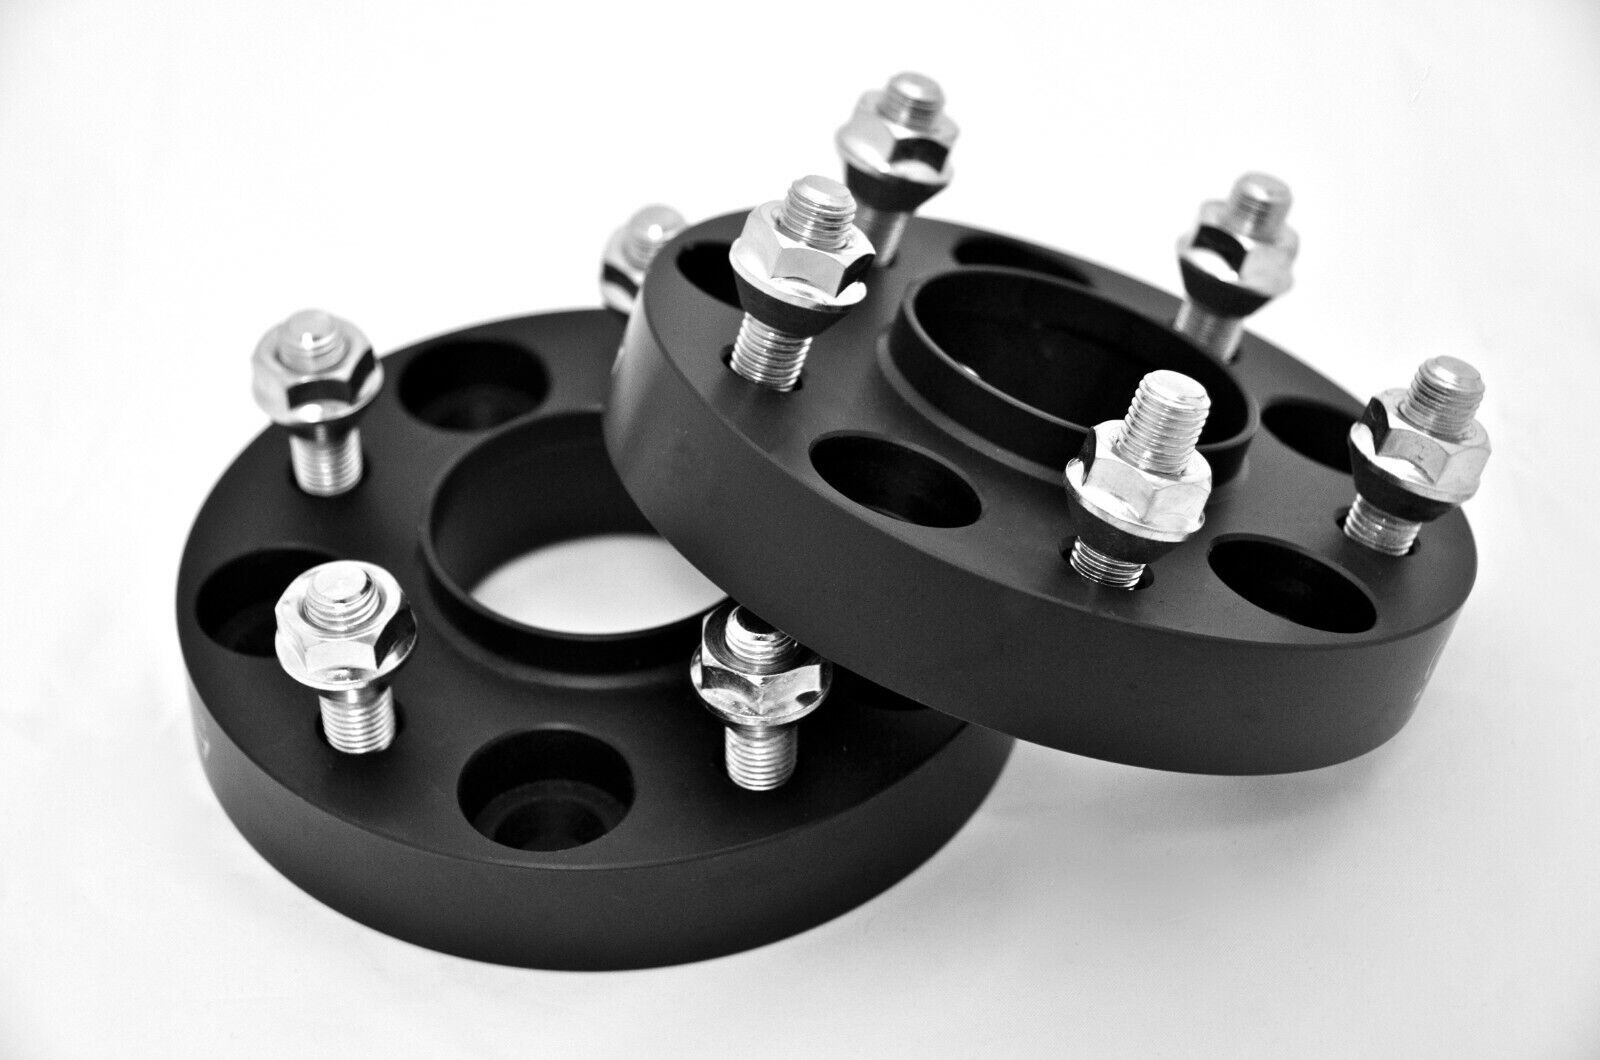 15MM FORGED BILLET HUB CENTRIC WHEEL SPACERS FOR TESLA MODEL S 5X120 CB 64.1 